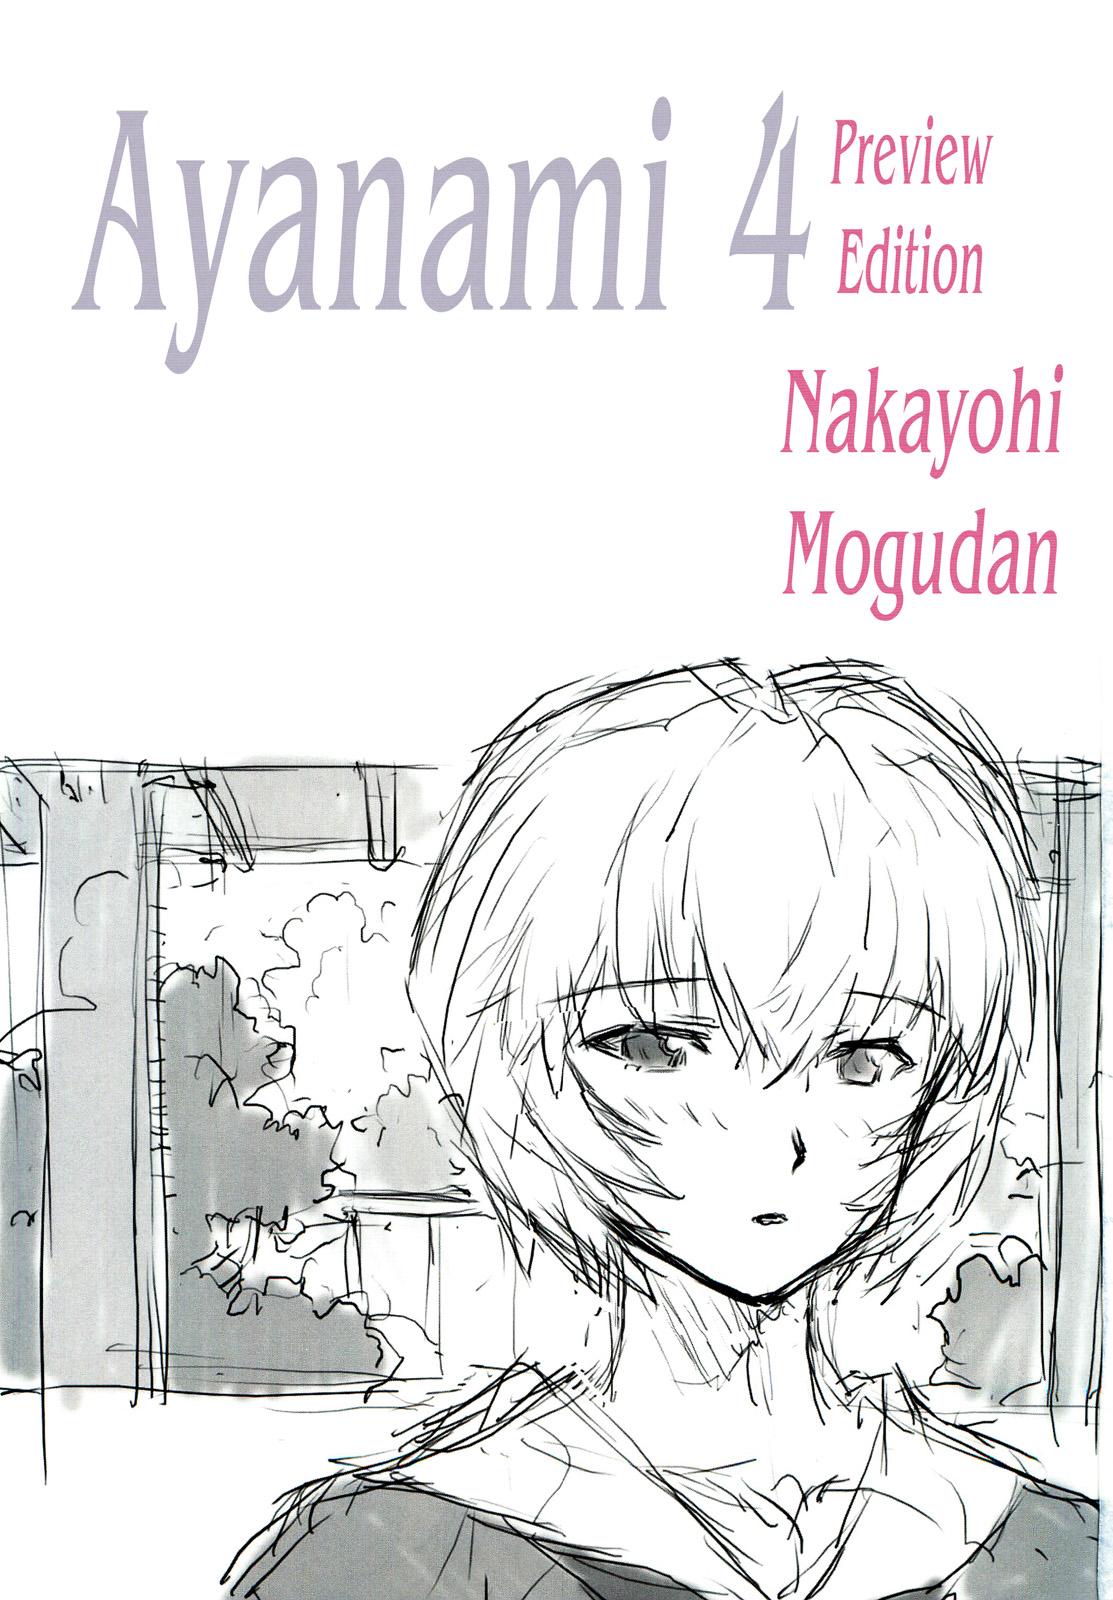 British Ayanami Dai 4 Kai Pure Han | Ayanami 4 Preview Edition - Neon genesis evangelion Pussy Play - Page 3